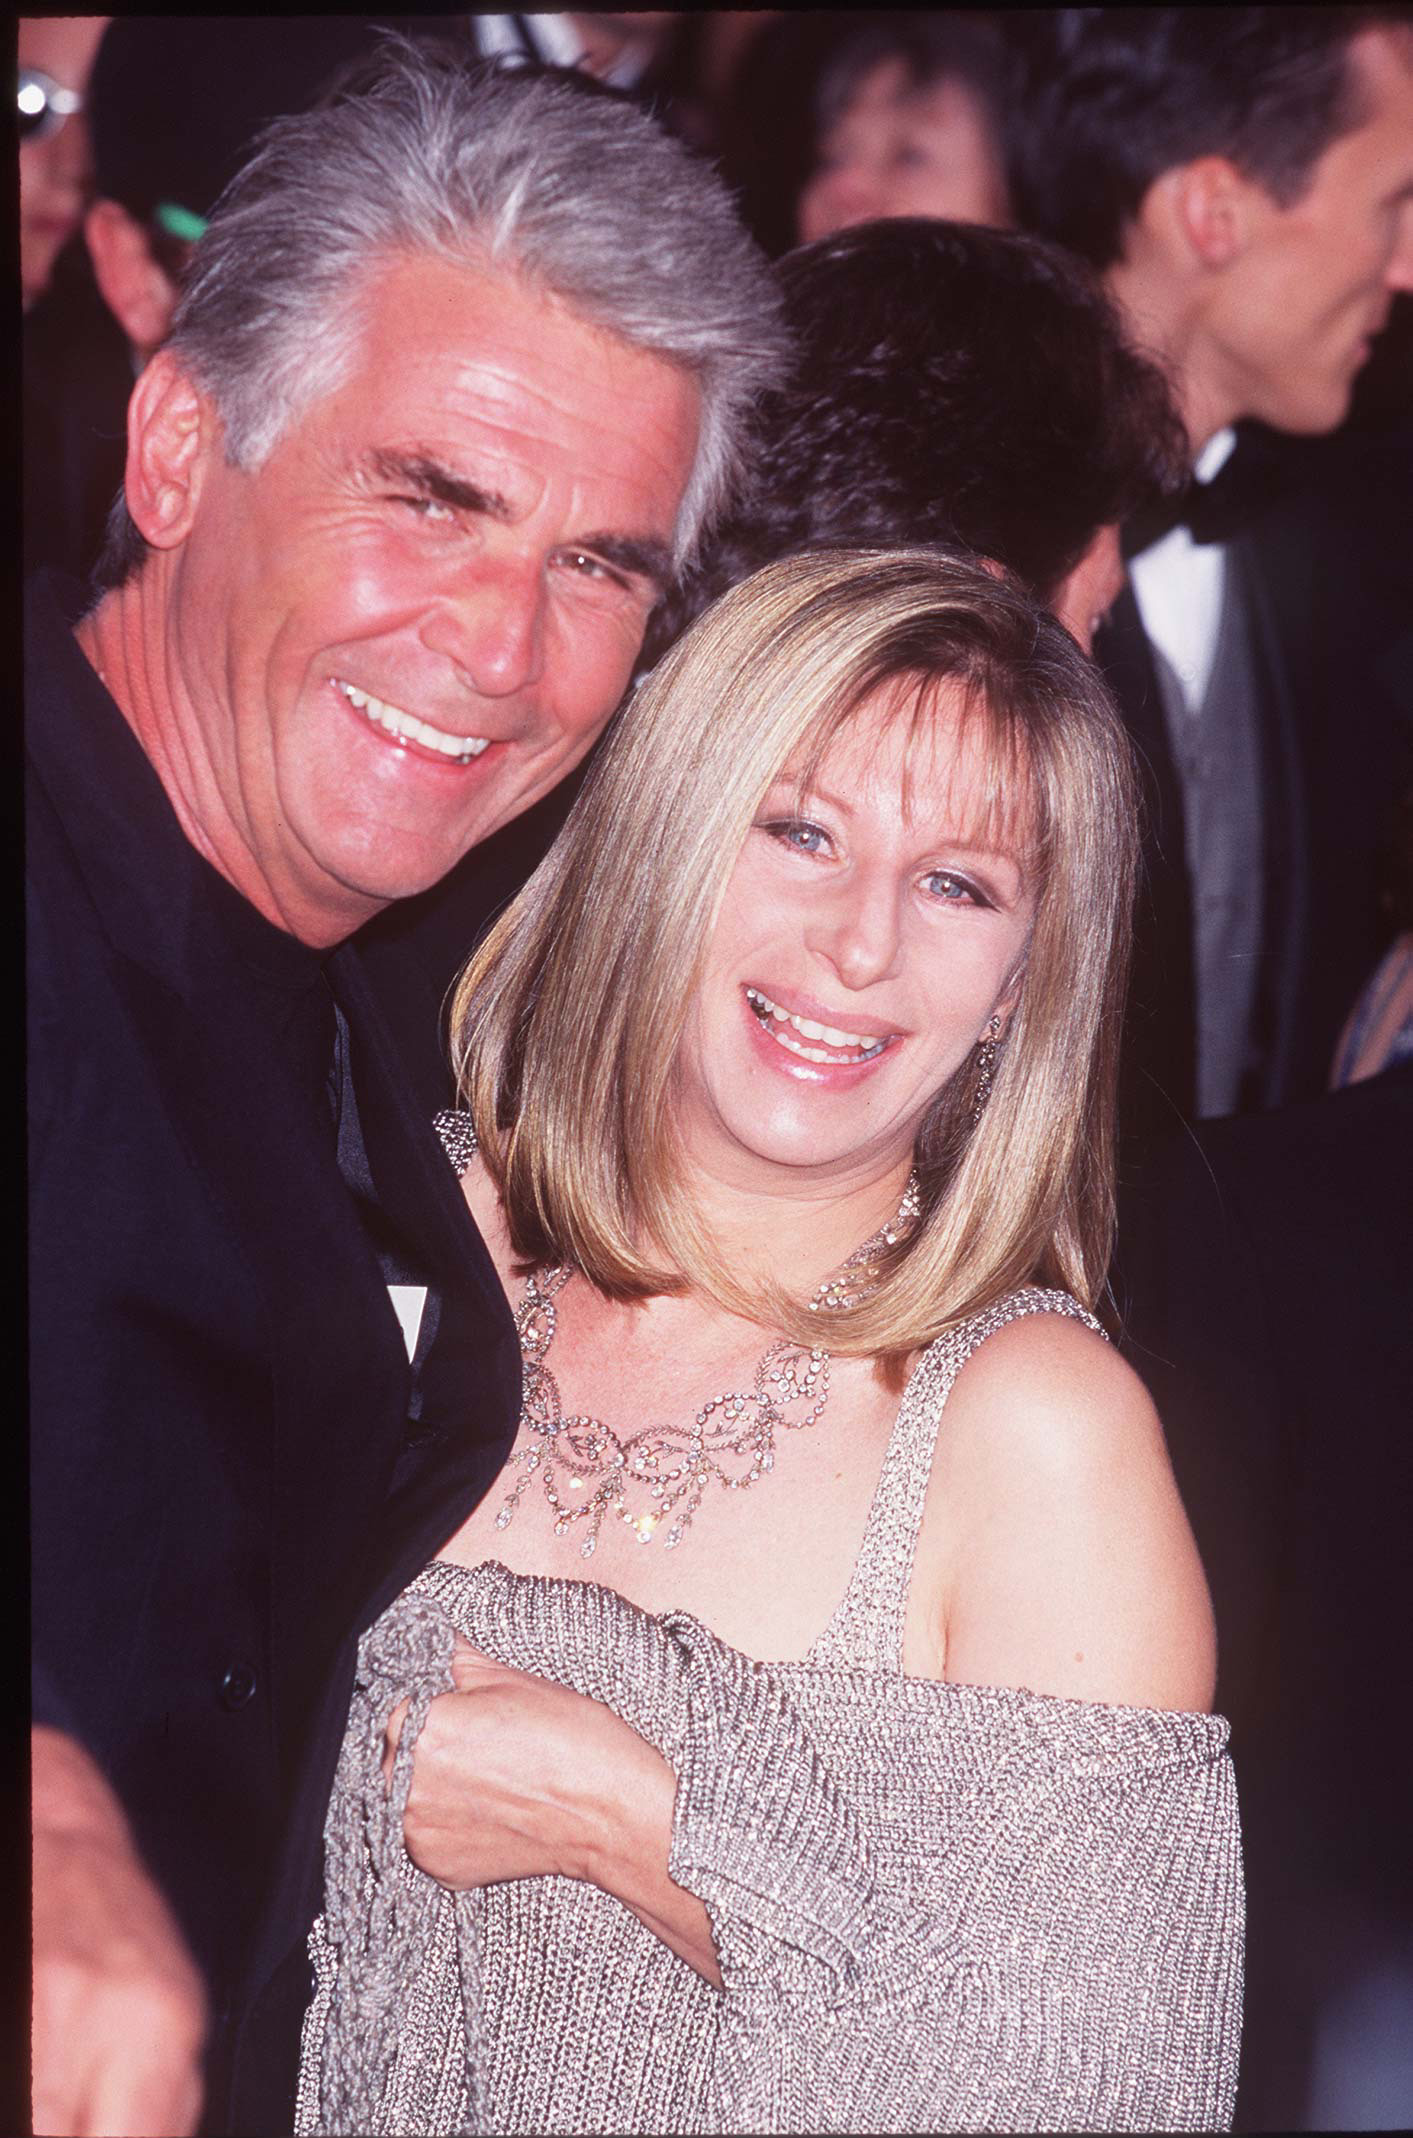 James Brolin and Barbra Streisand during The 69th Annual Academy Awards - Arrivals at Shrine Auditorium in Los Angeles, California | Source: Getty Images